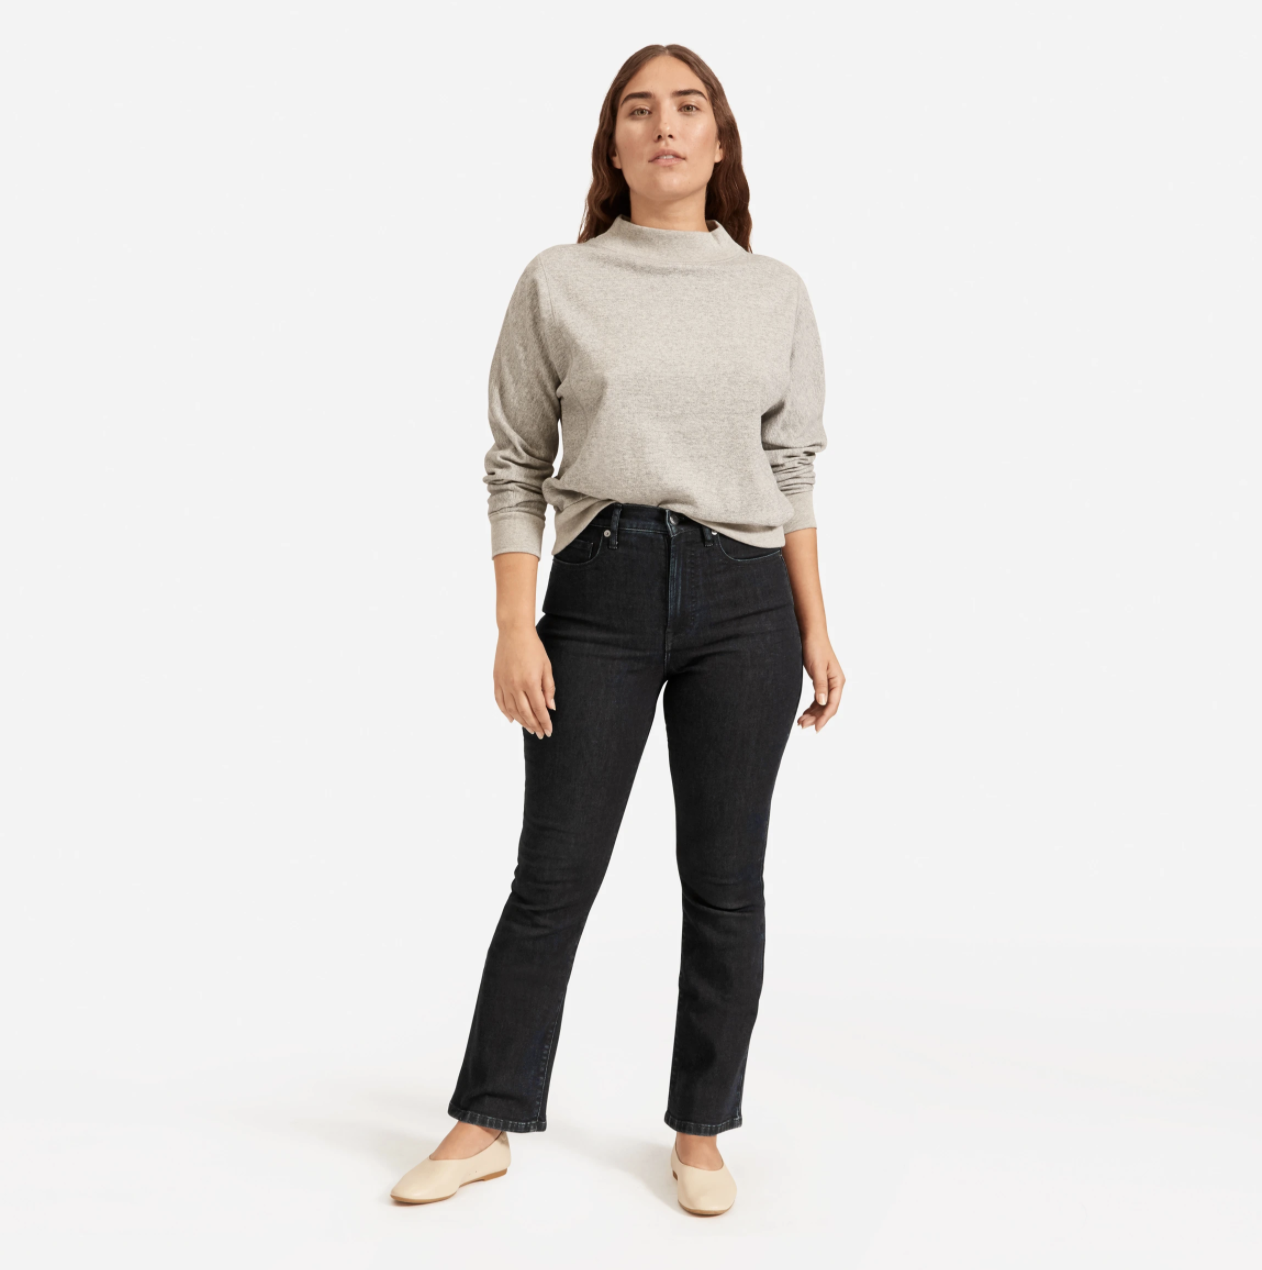 29 Fashionable Basics to Buy From Everlane's Summer Sale | Who What Wear